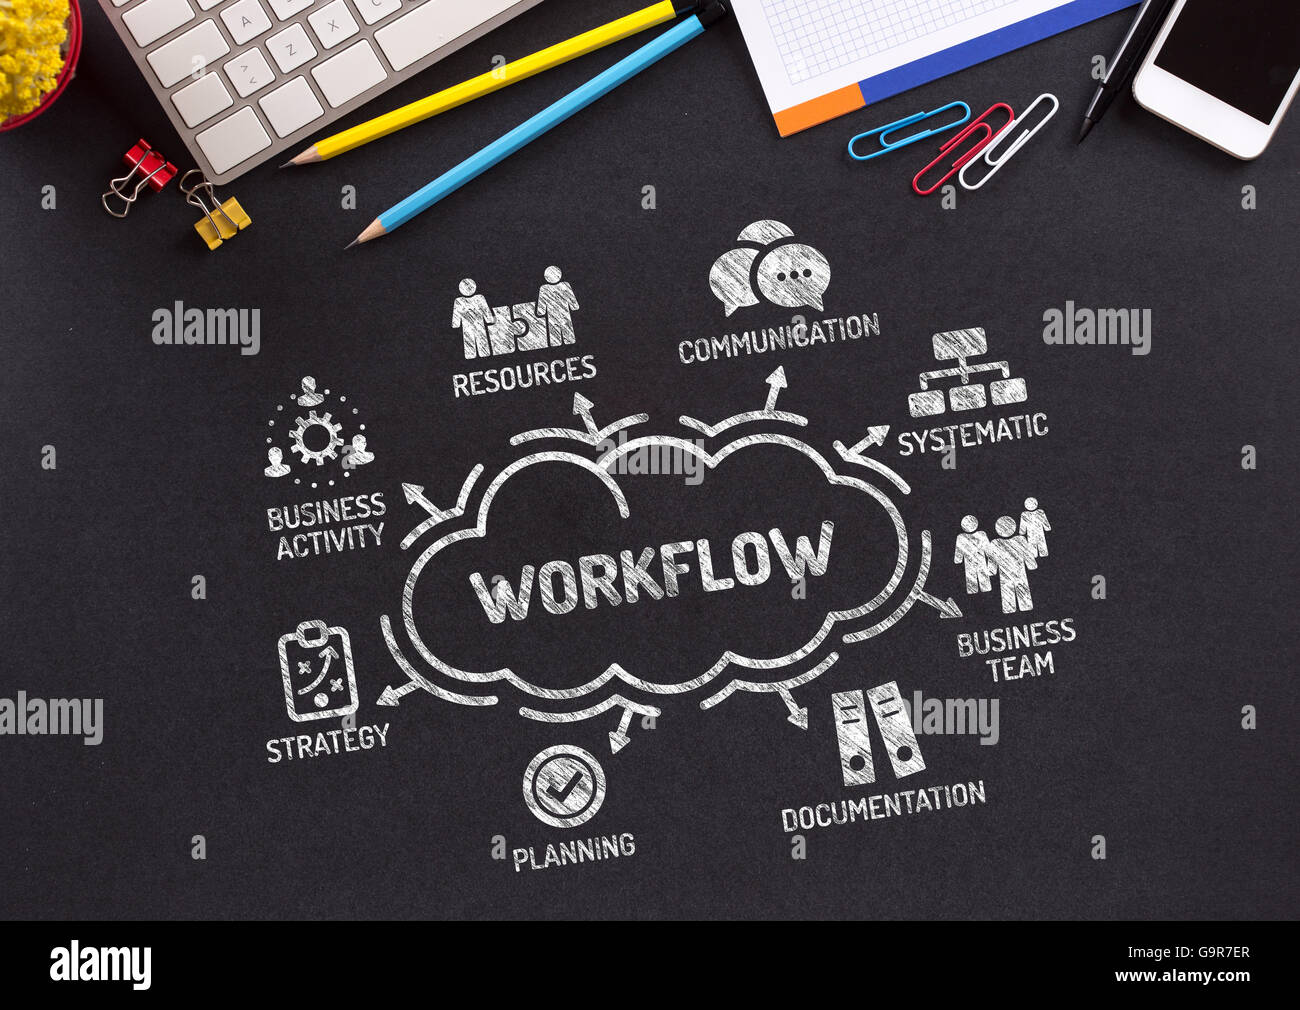 Workflow Chart with keywords and icons on blackboard Stock Photo